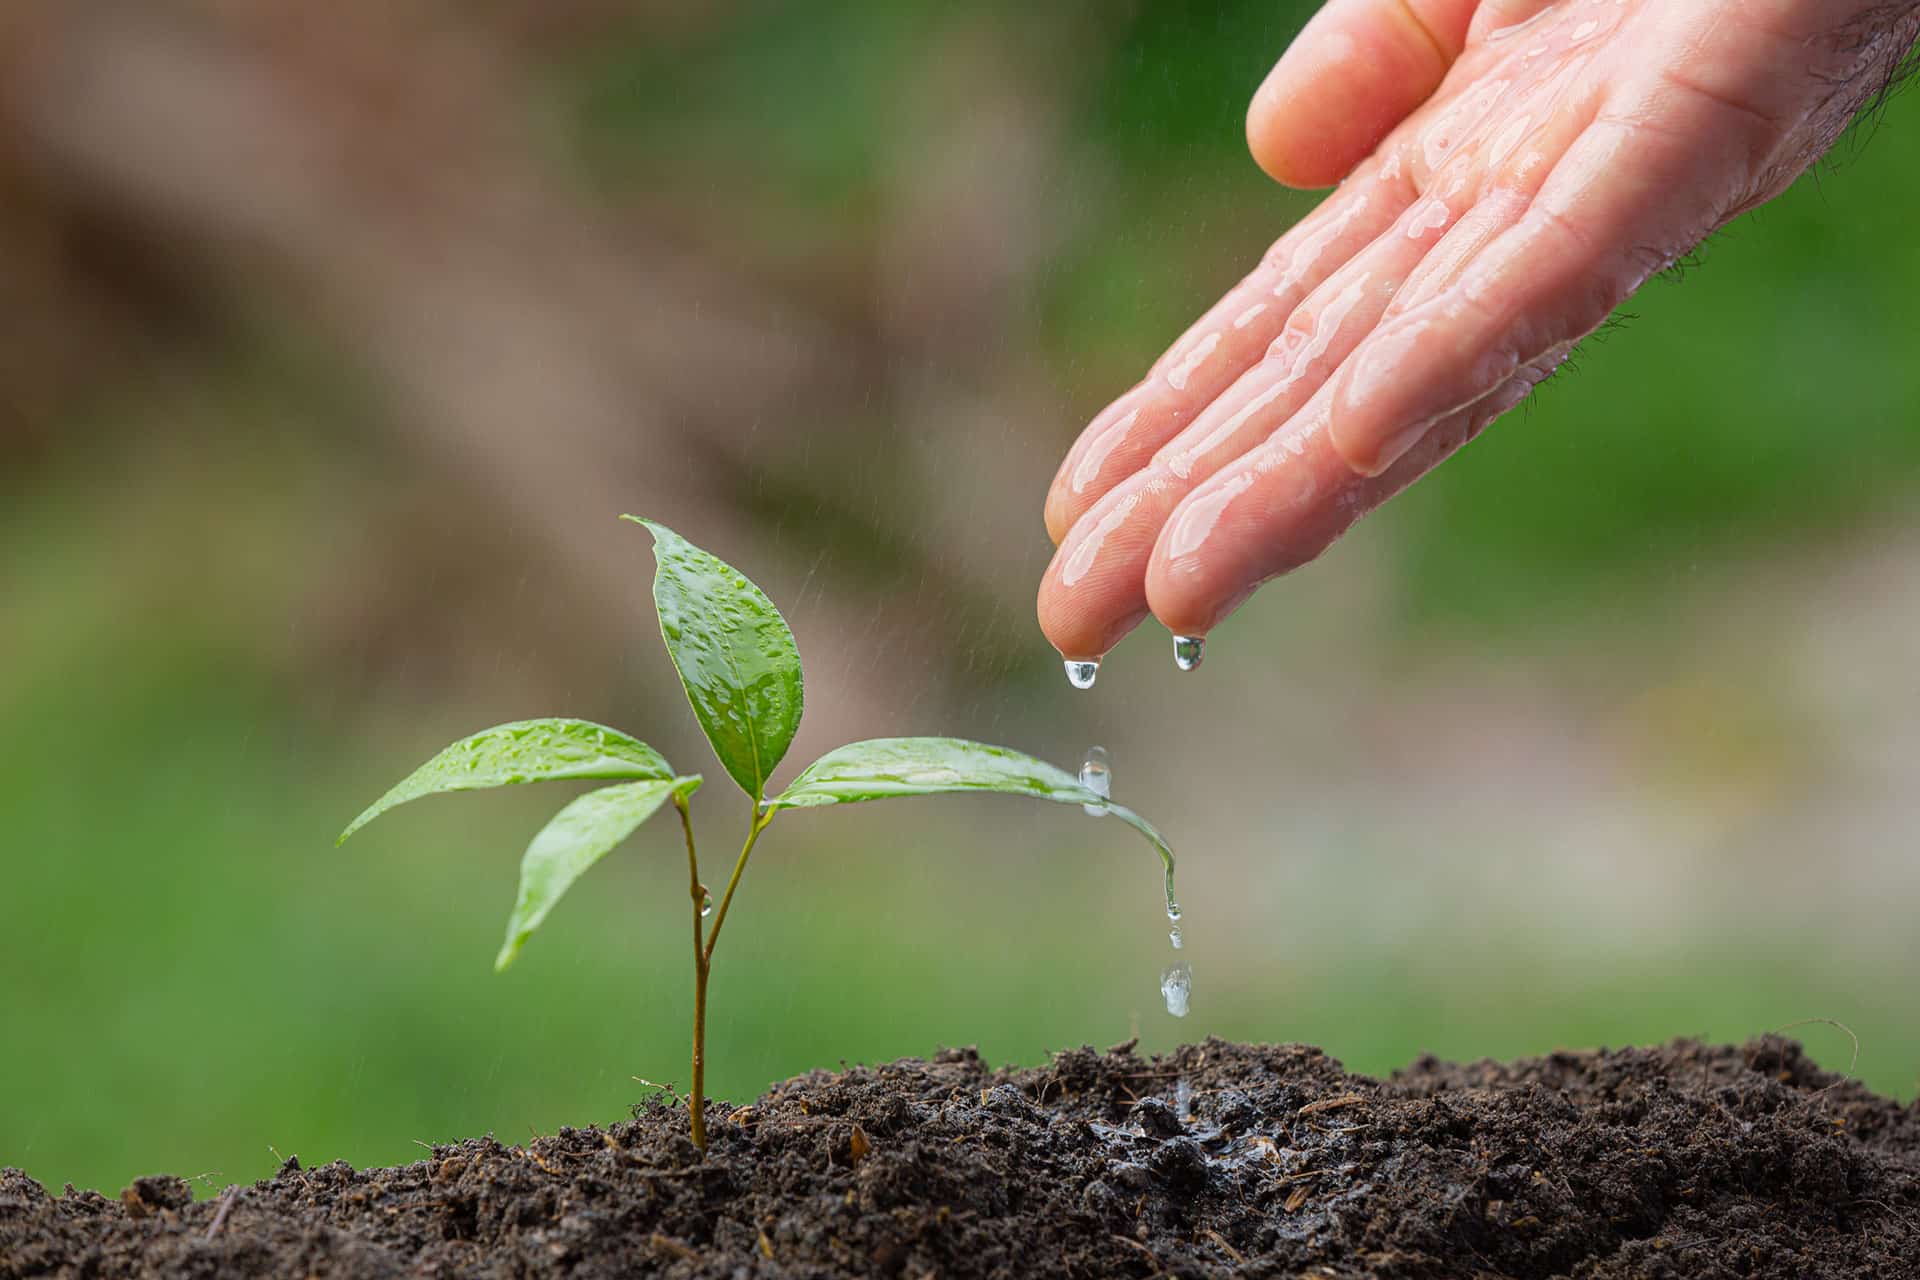 a hand is sprinkling water onto a small green plant.